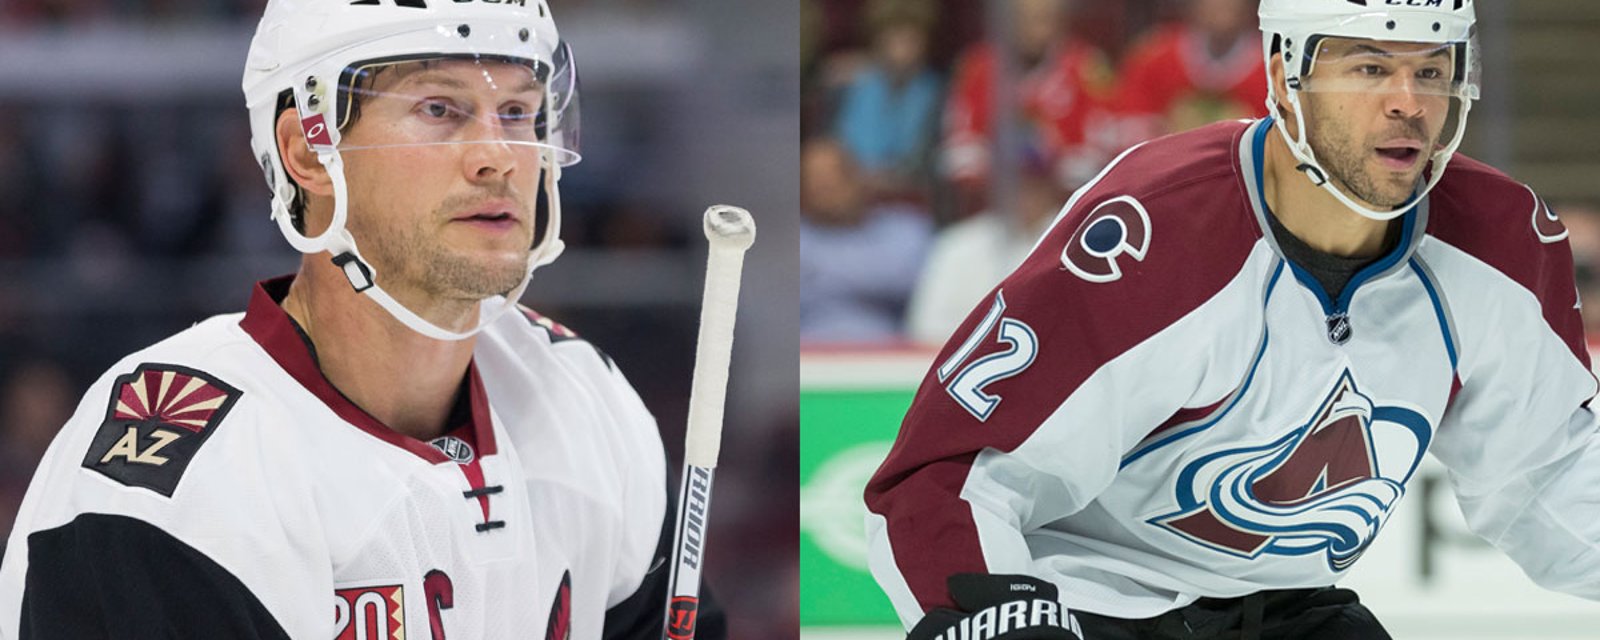 Breaking: Shane Doan and Jarome Iginla may both get a very interesting offer!